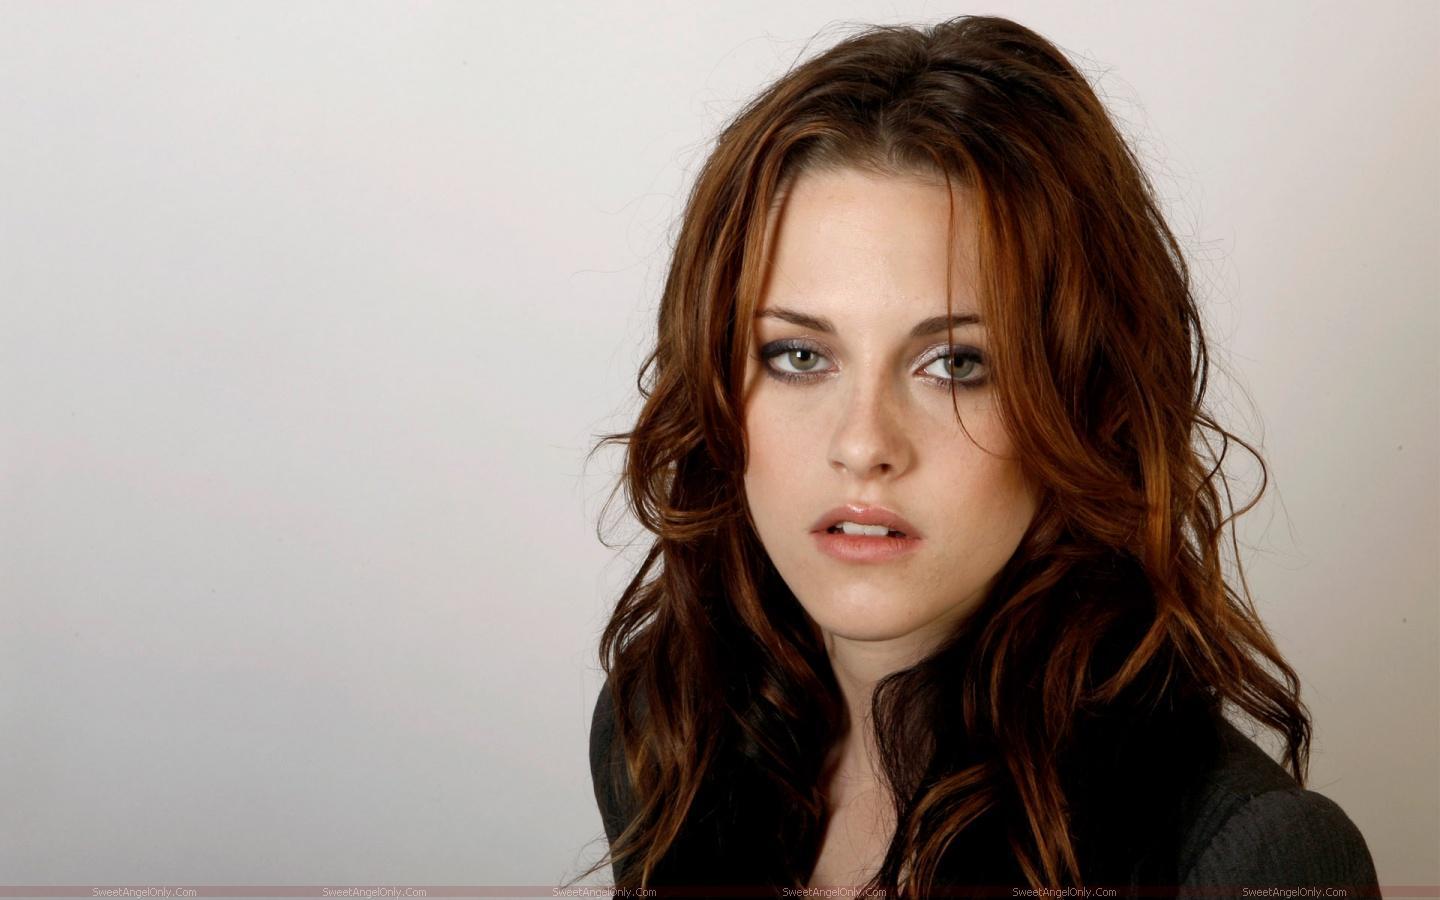 Kristen_Stewart_Click on the Image for Larger View